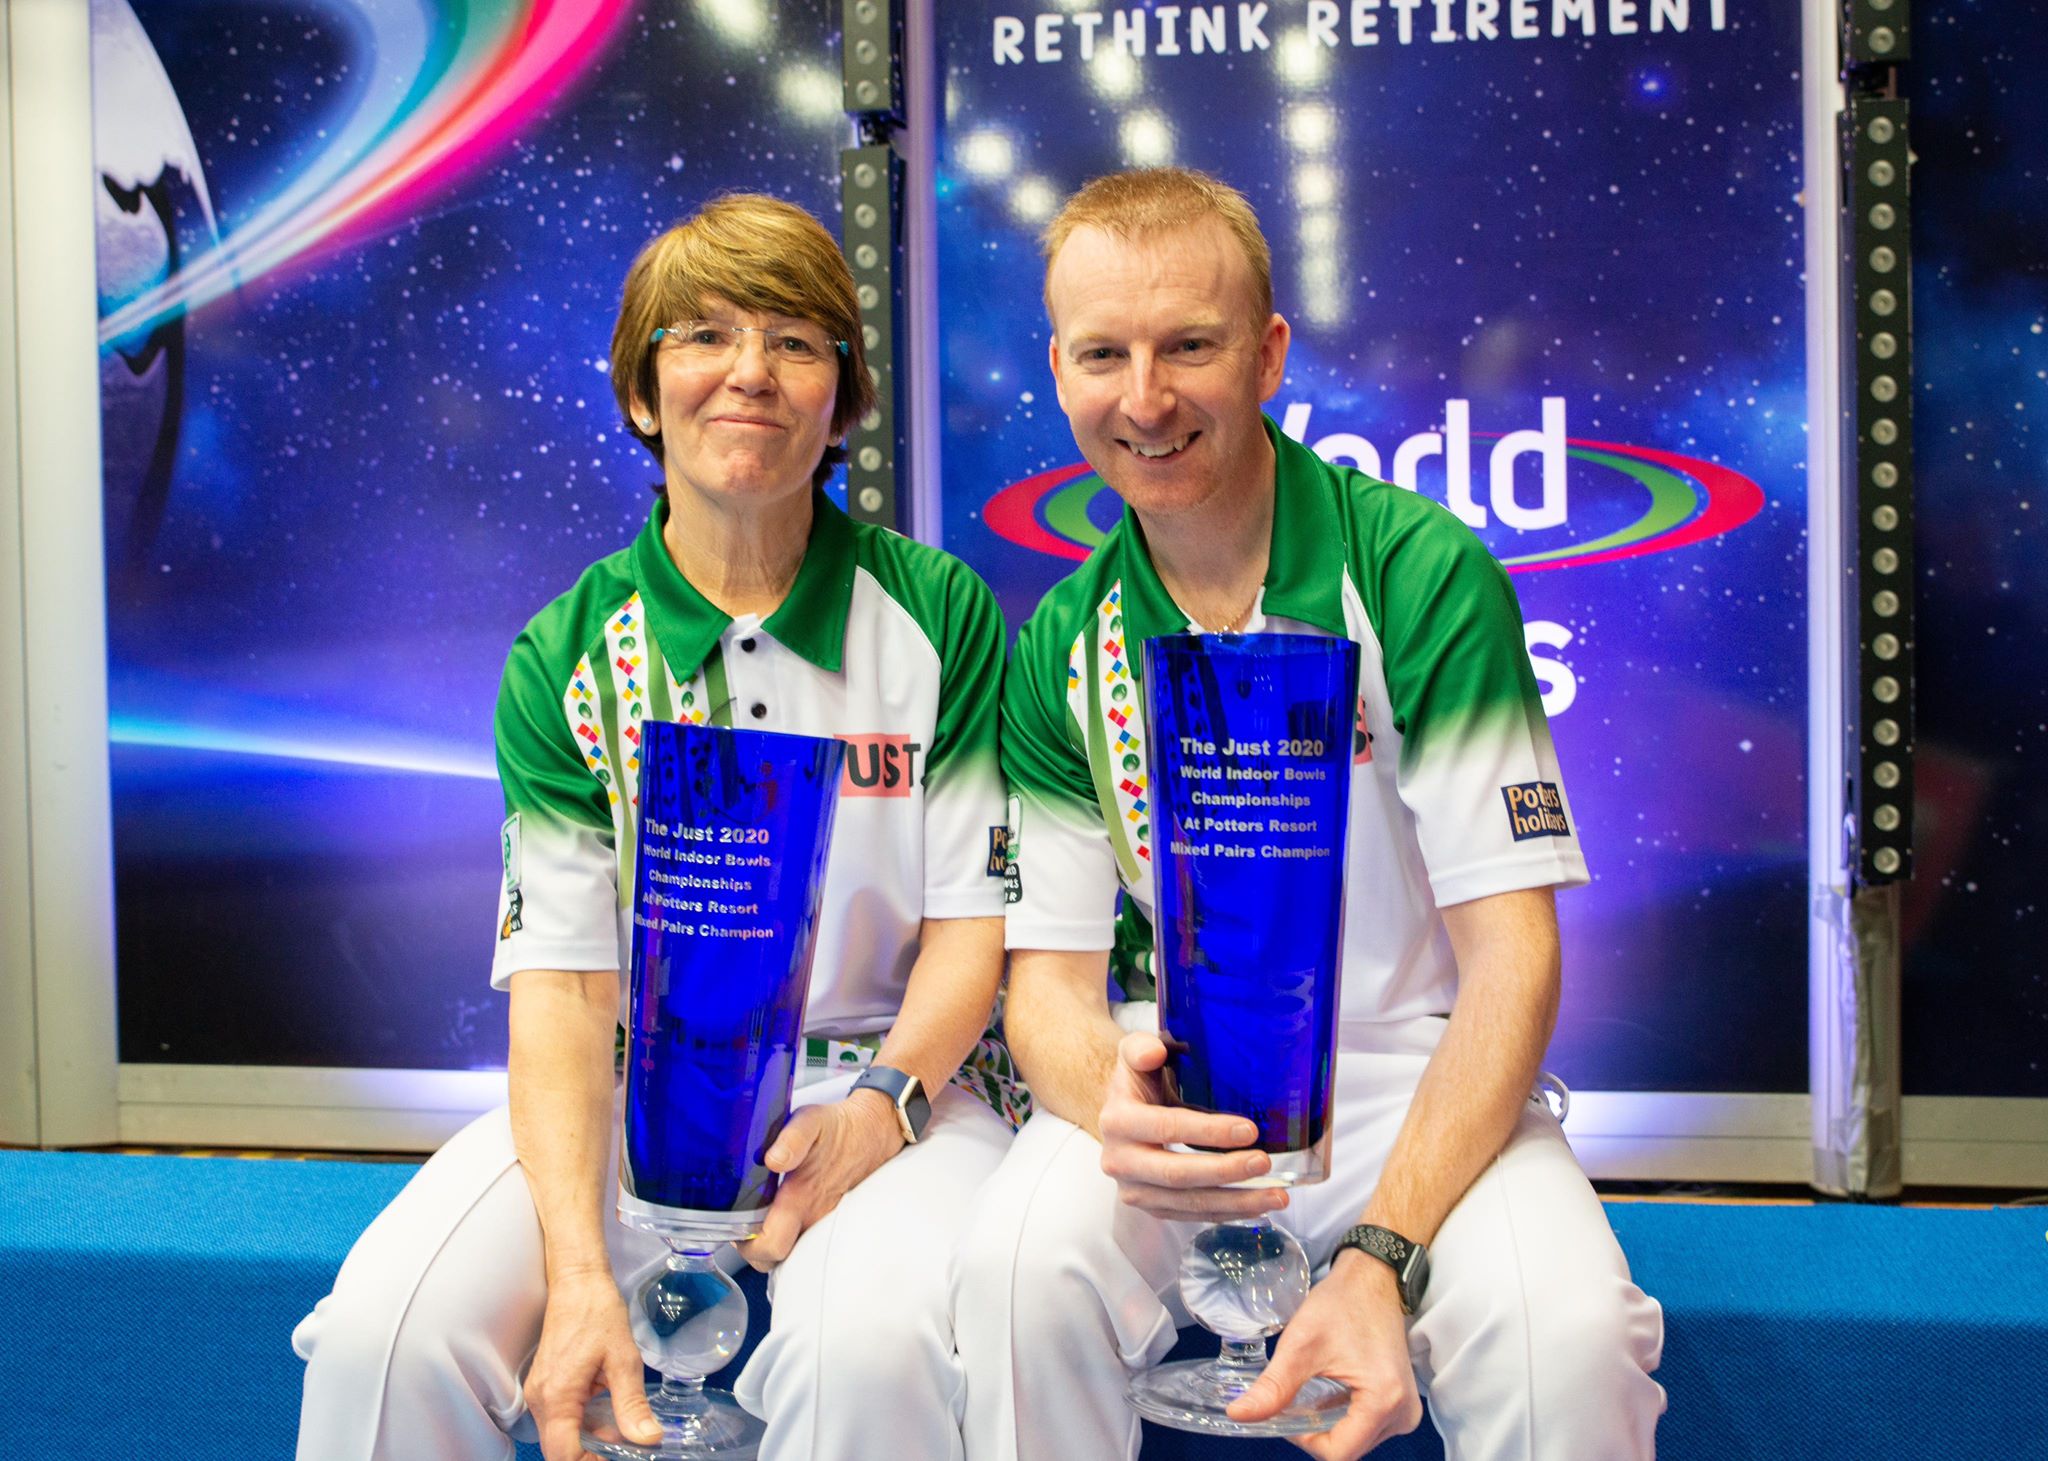 Marion Purcell and Nick Brett- the 2020 Mixed Pairs World Indoor Bowling Champions